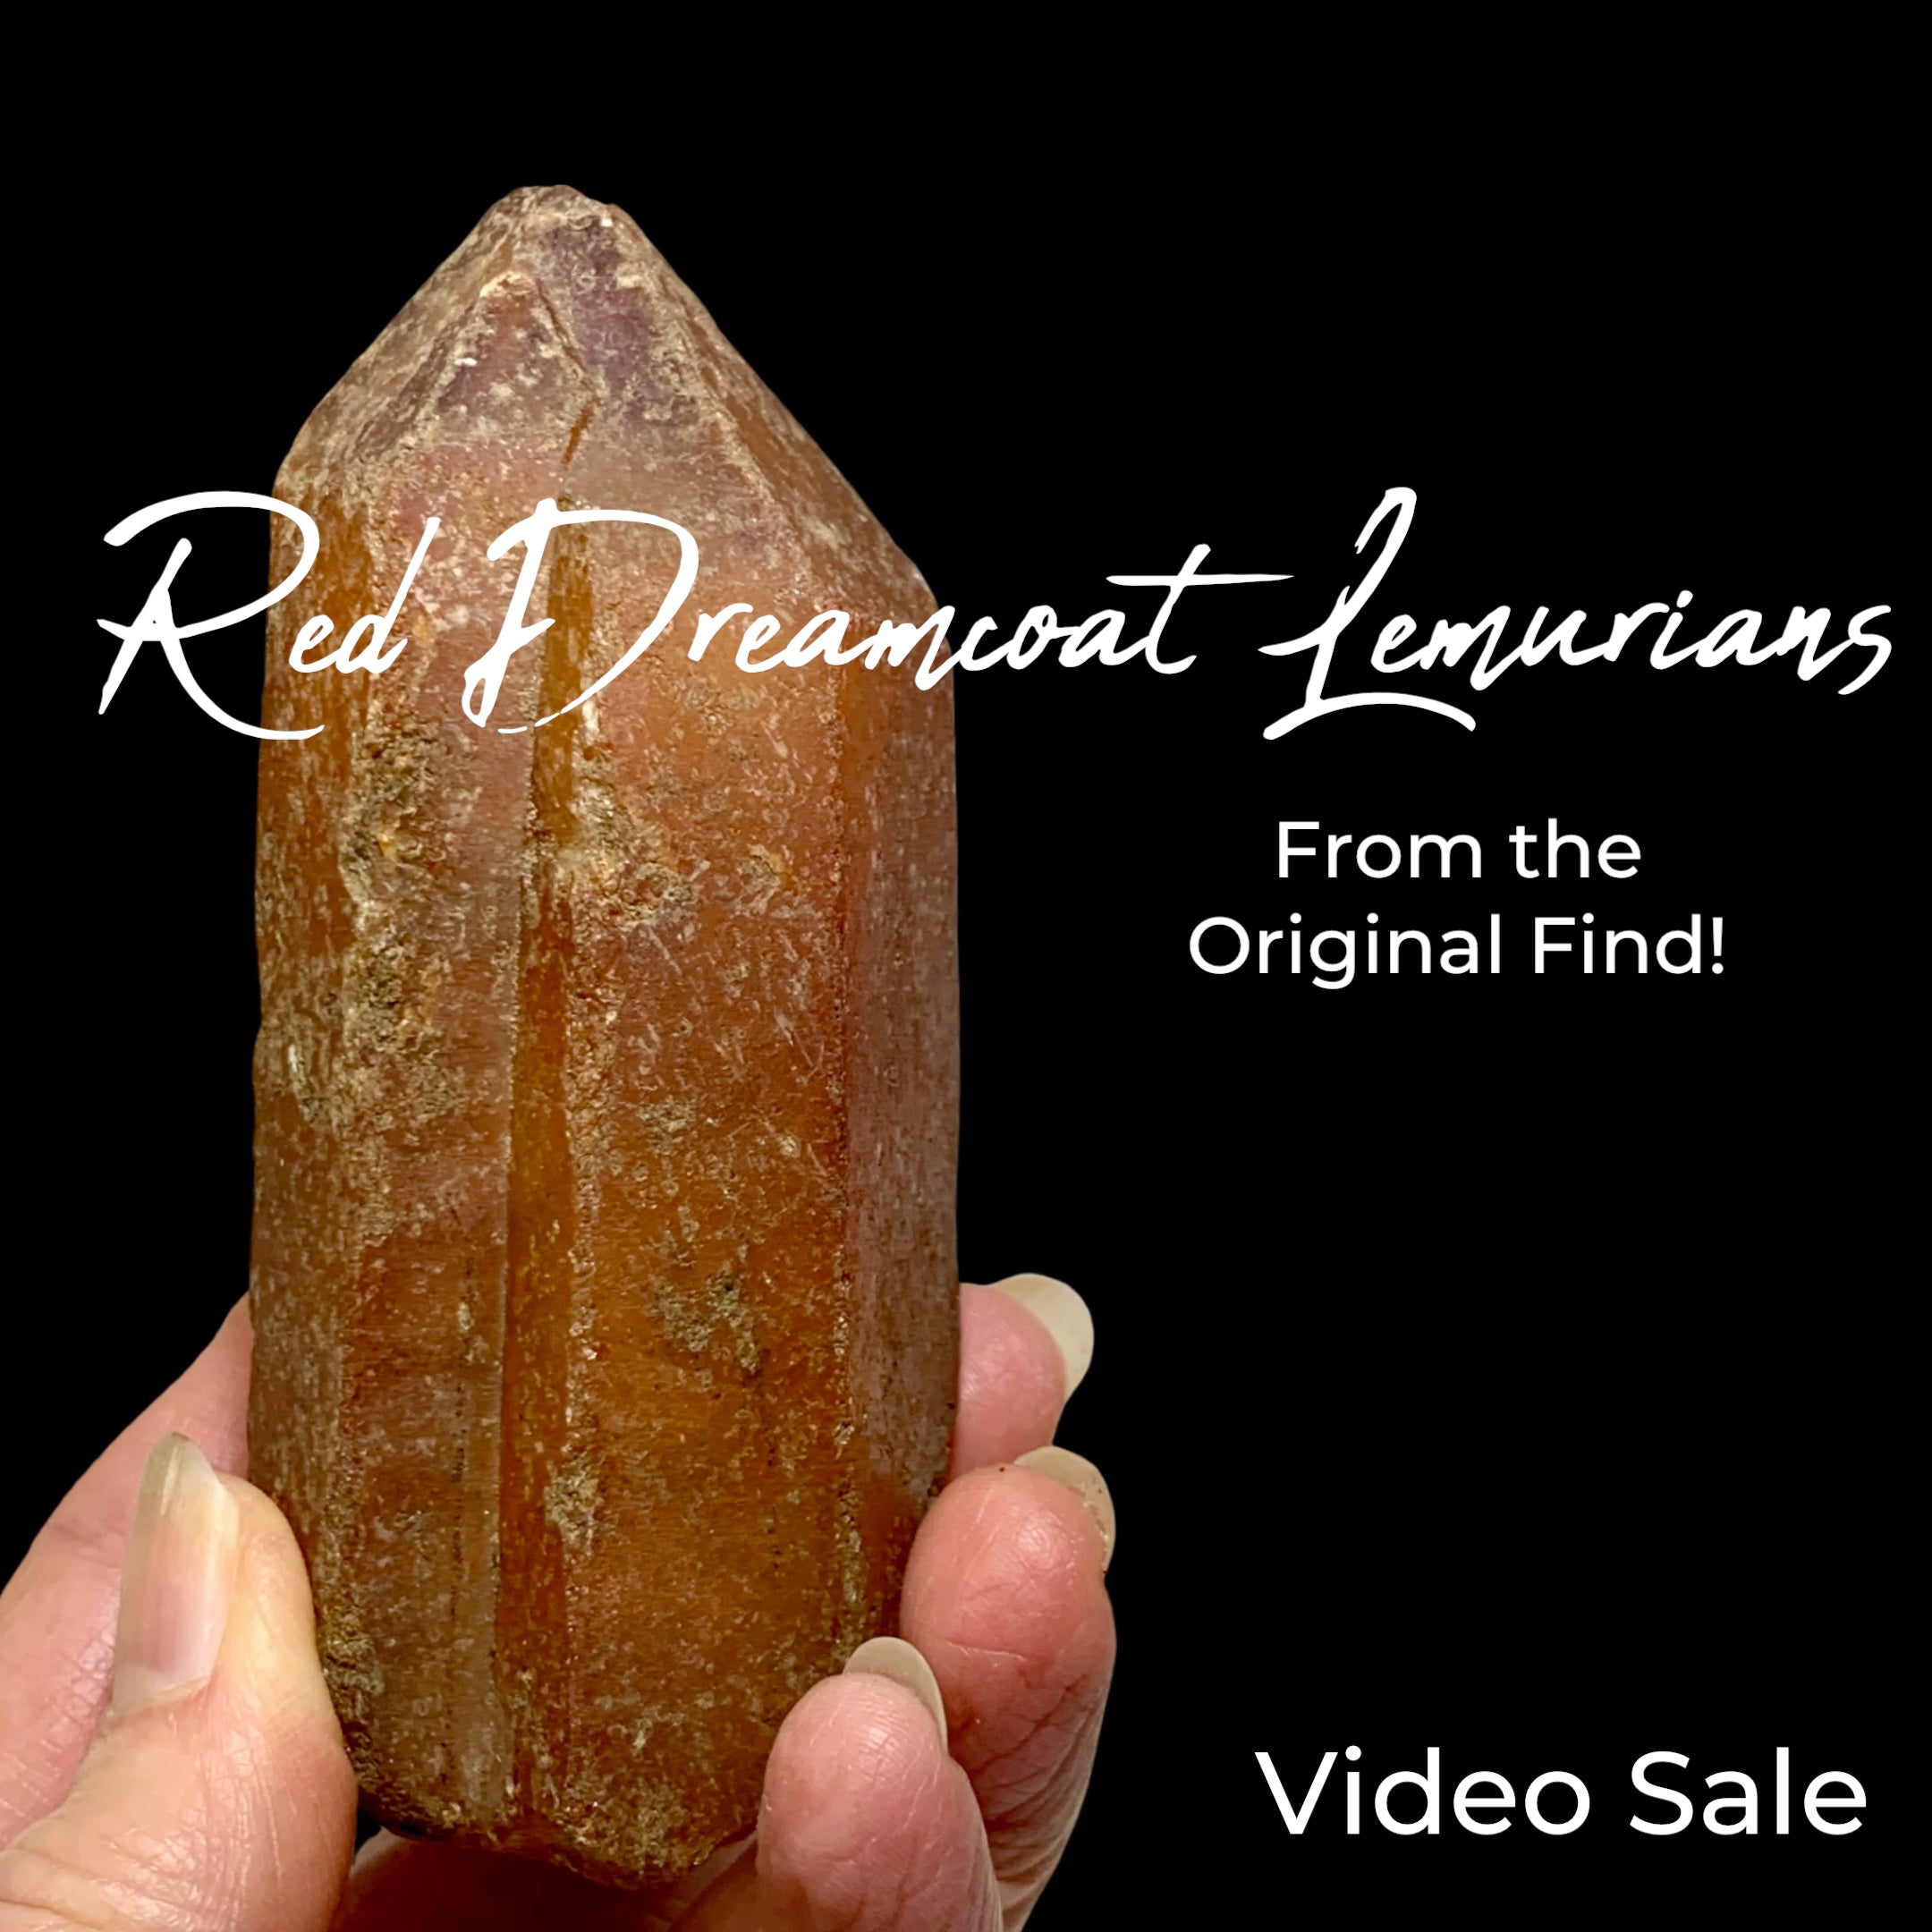 Red Dreamcoat Lemurian Points-Video Sale